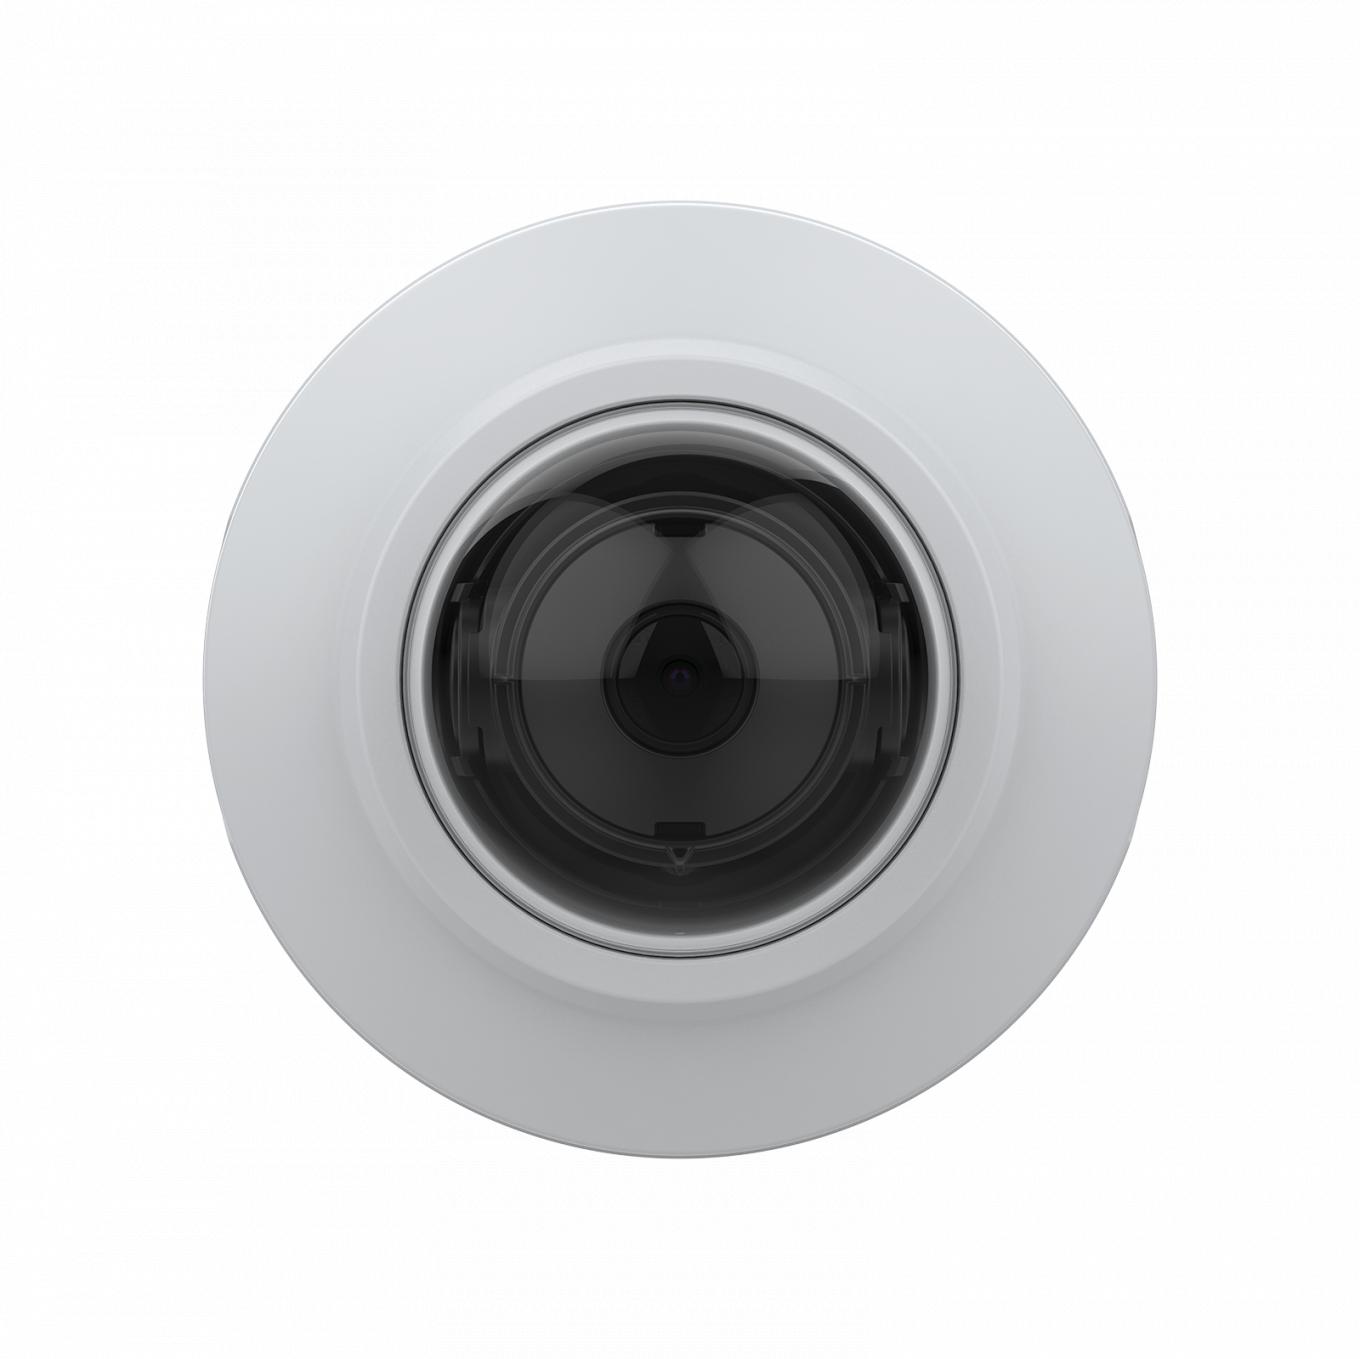 AXIS M3088-V Dome Camera | Axis Communications